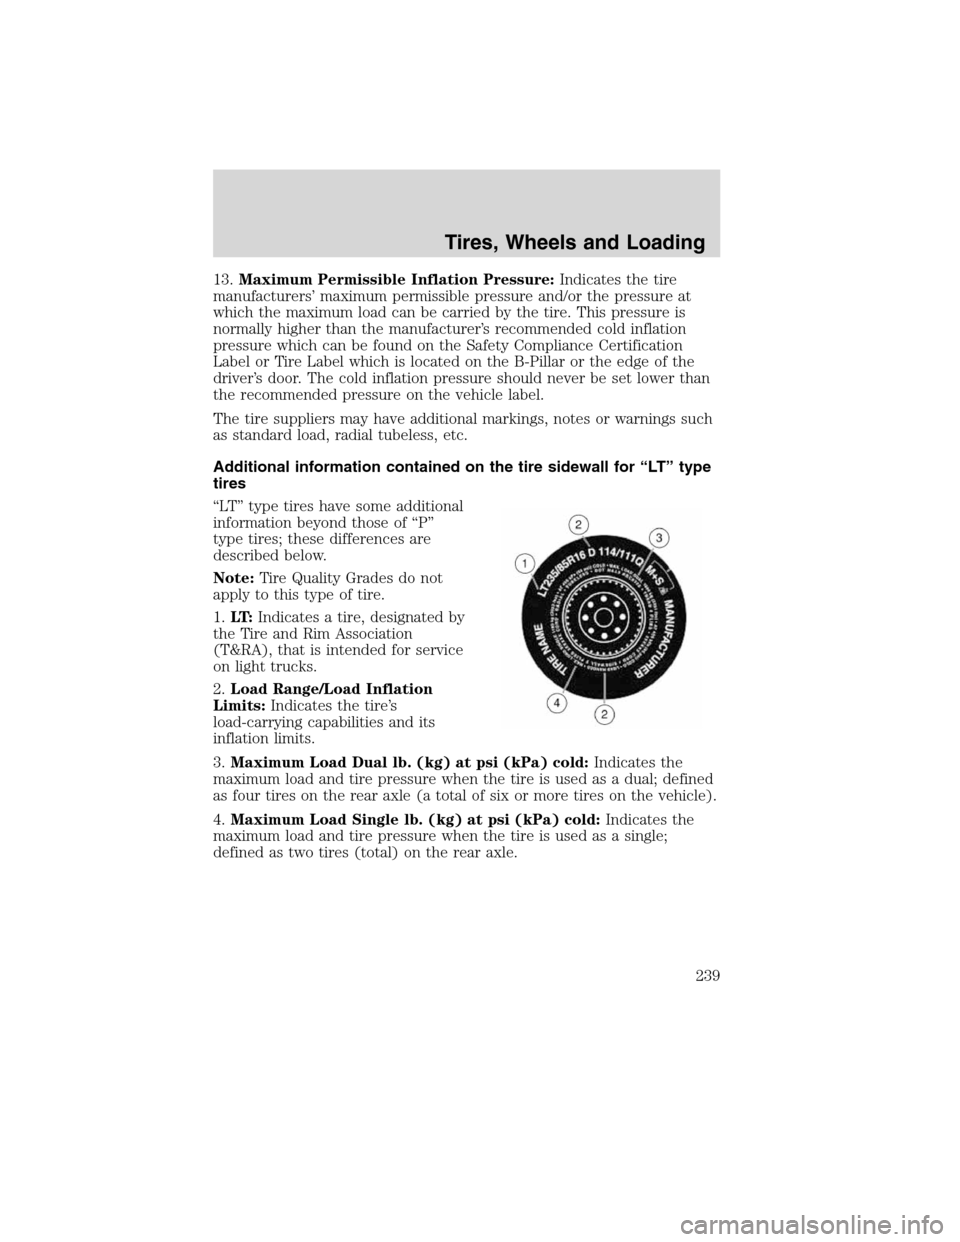 Mercury Mountaineer 2010  Owners Manuals 13.Maximum Permissible Inflation Pressure:Indicates the tire
manufacturers’ maximum permissible pressure and/or the pressure at
which the maximum load can be carried by the tire. This pressure is
no